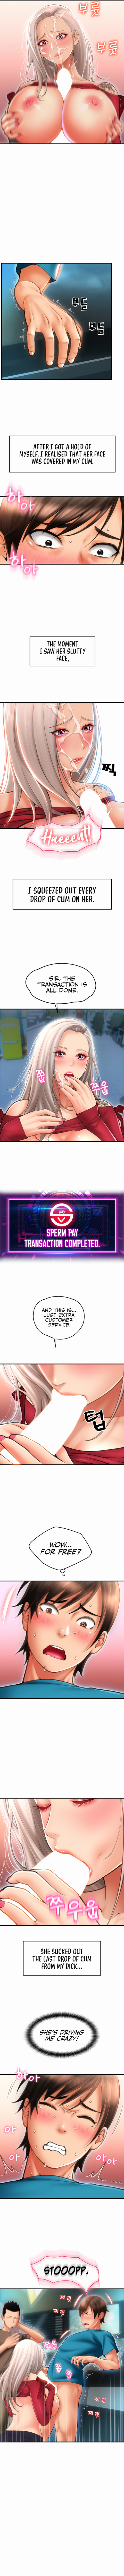 Pay with Sperm Pay NEW image